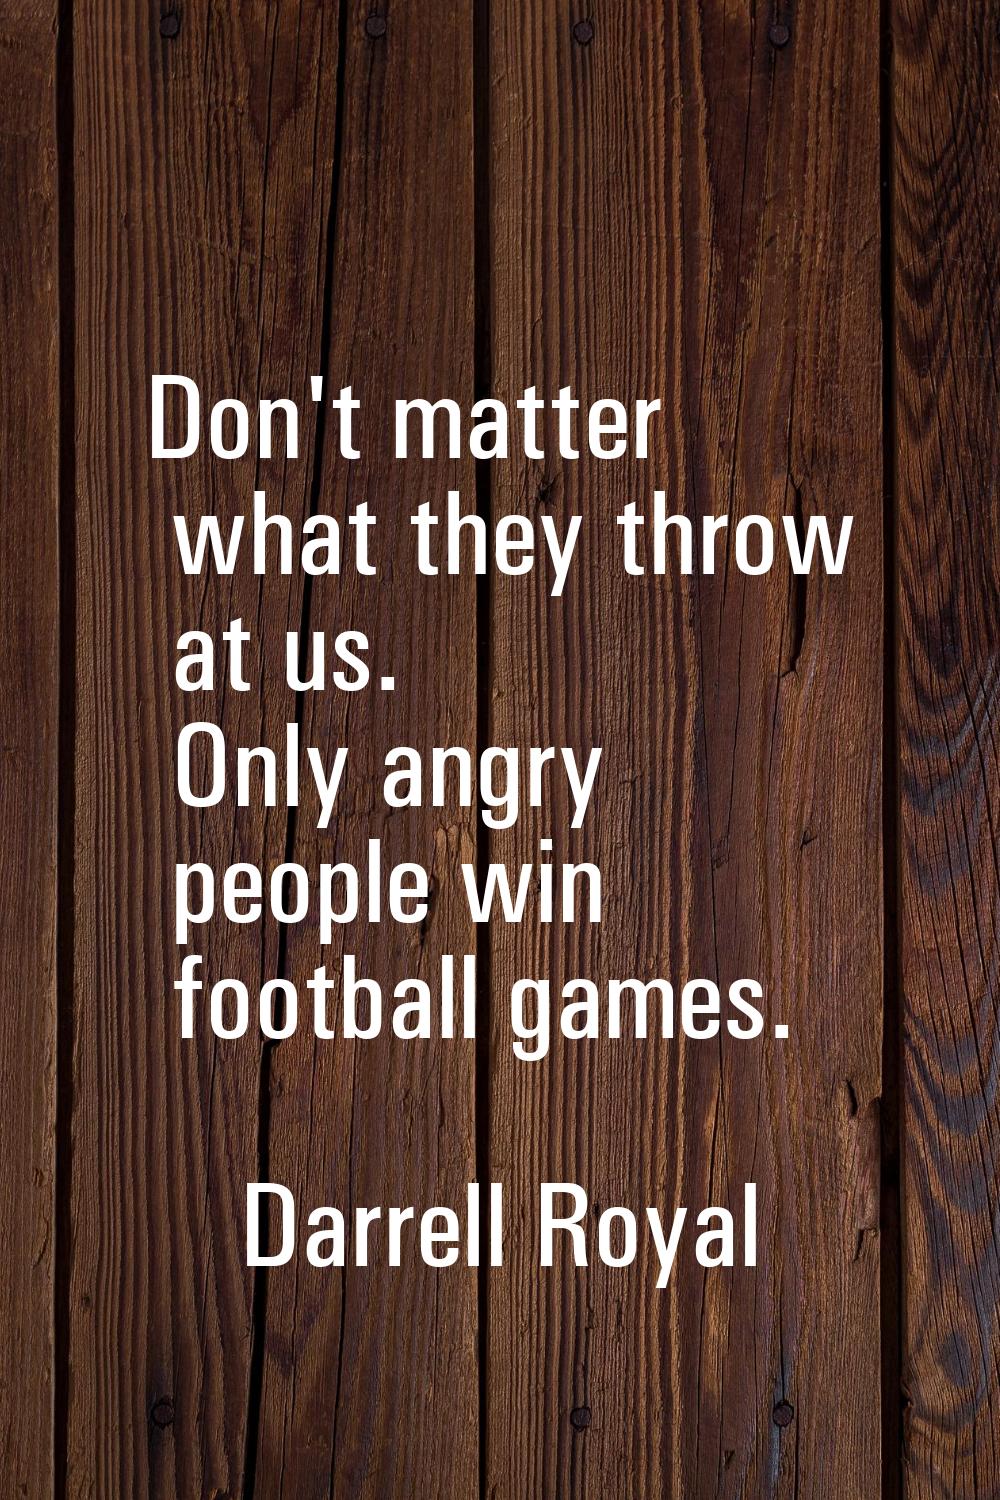 Don't matter what they throw at us. Only angry people win football games.